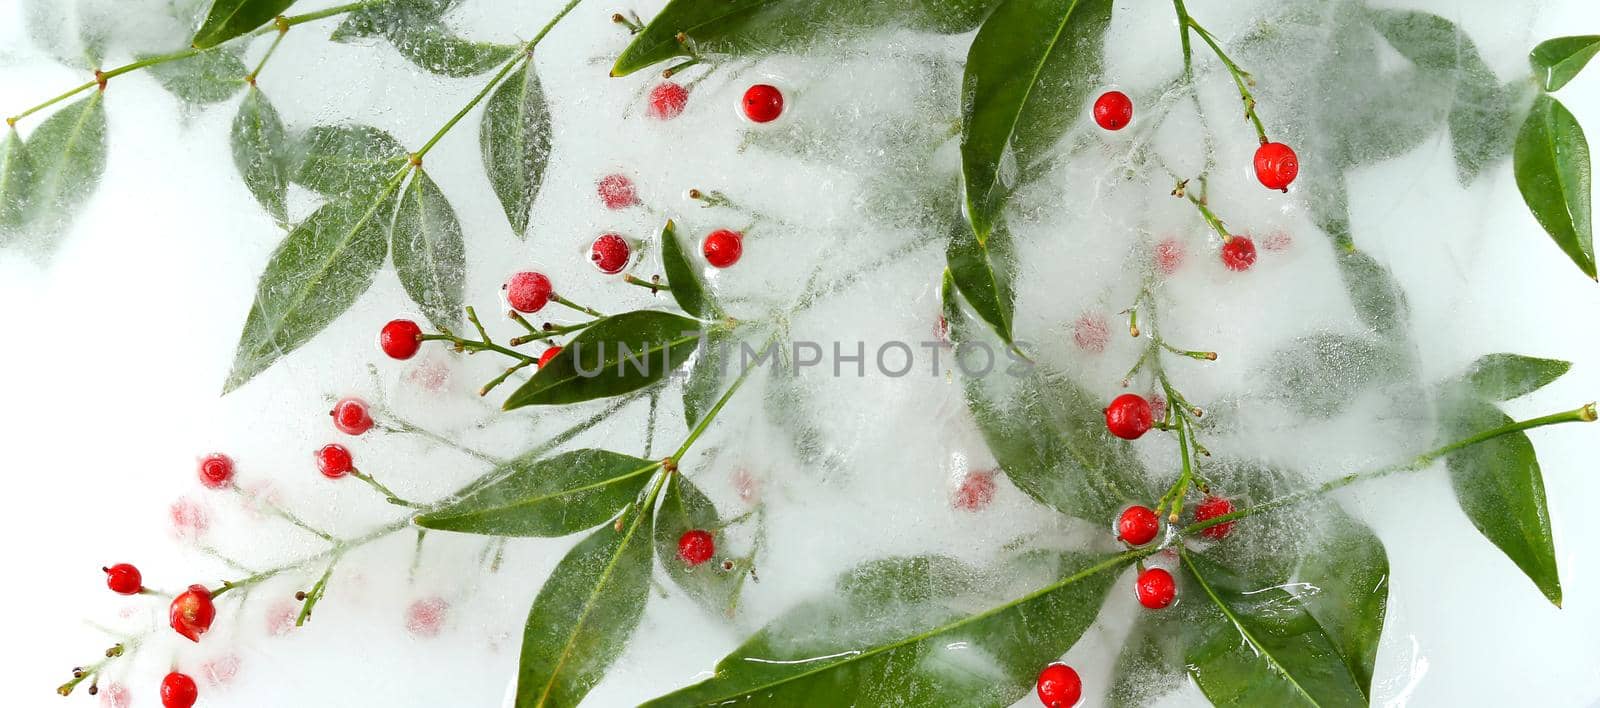 Frozen flowers. Japanese bamboo with red berries, top view. Beautiful flowers arrangement